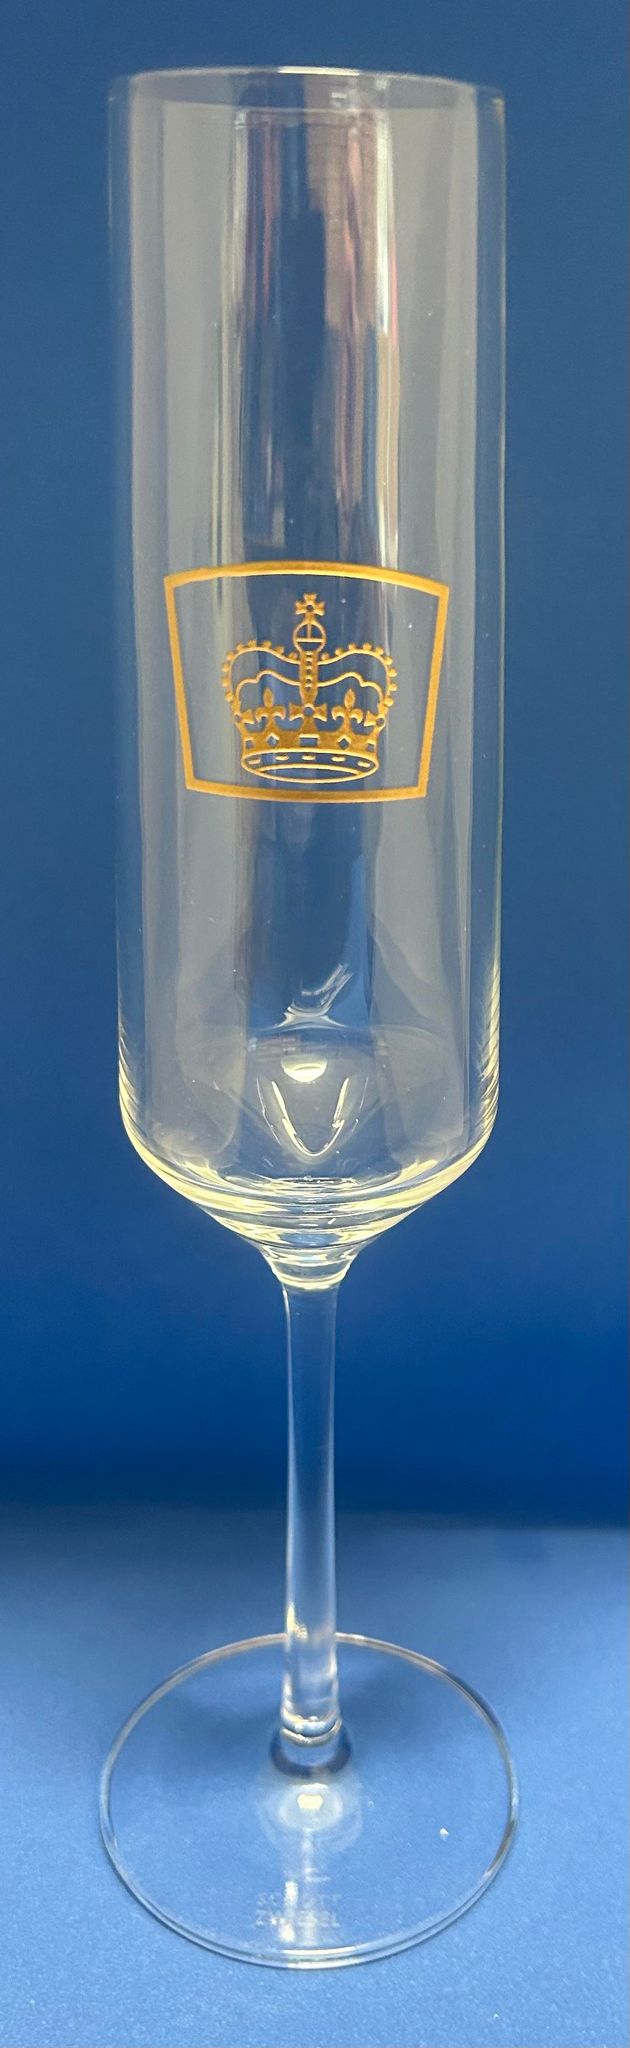 a champagne flute with the queens guide emblem etched in gold